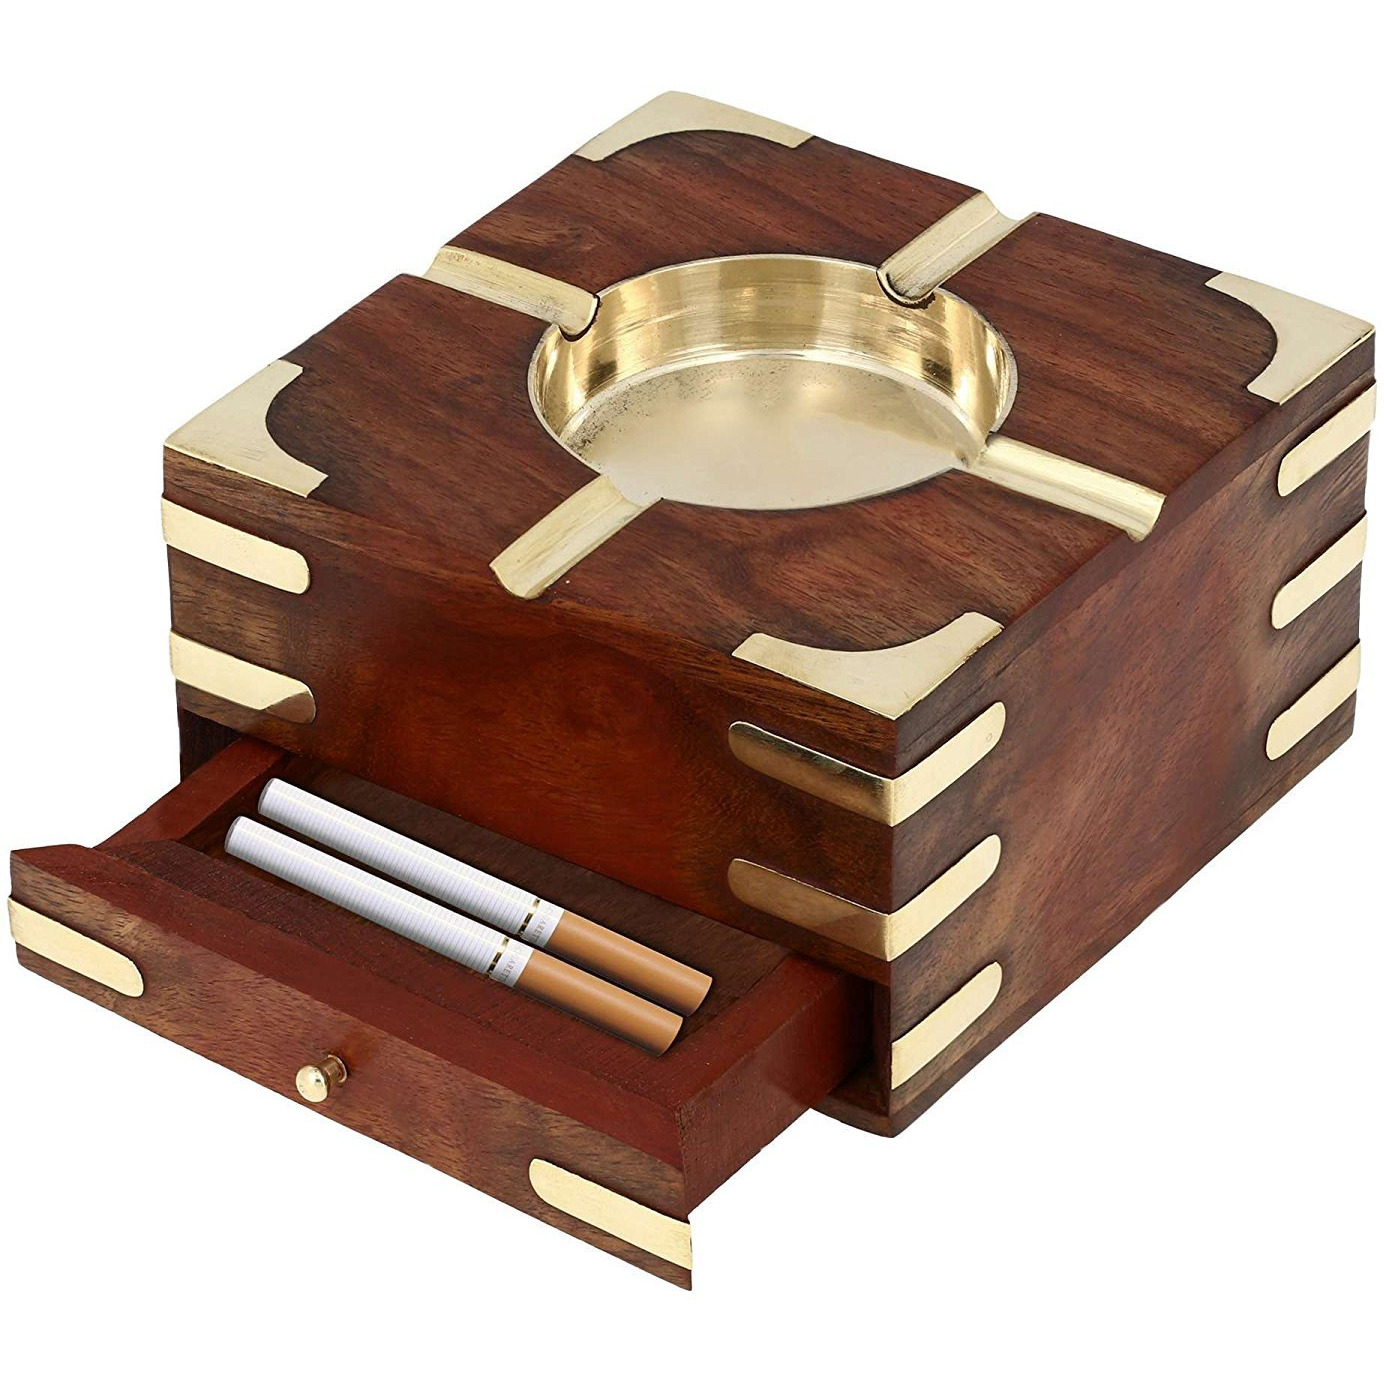 Winmaarc Large Decorative Wooden Ashtray with Cigarette Storage Case Box